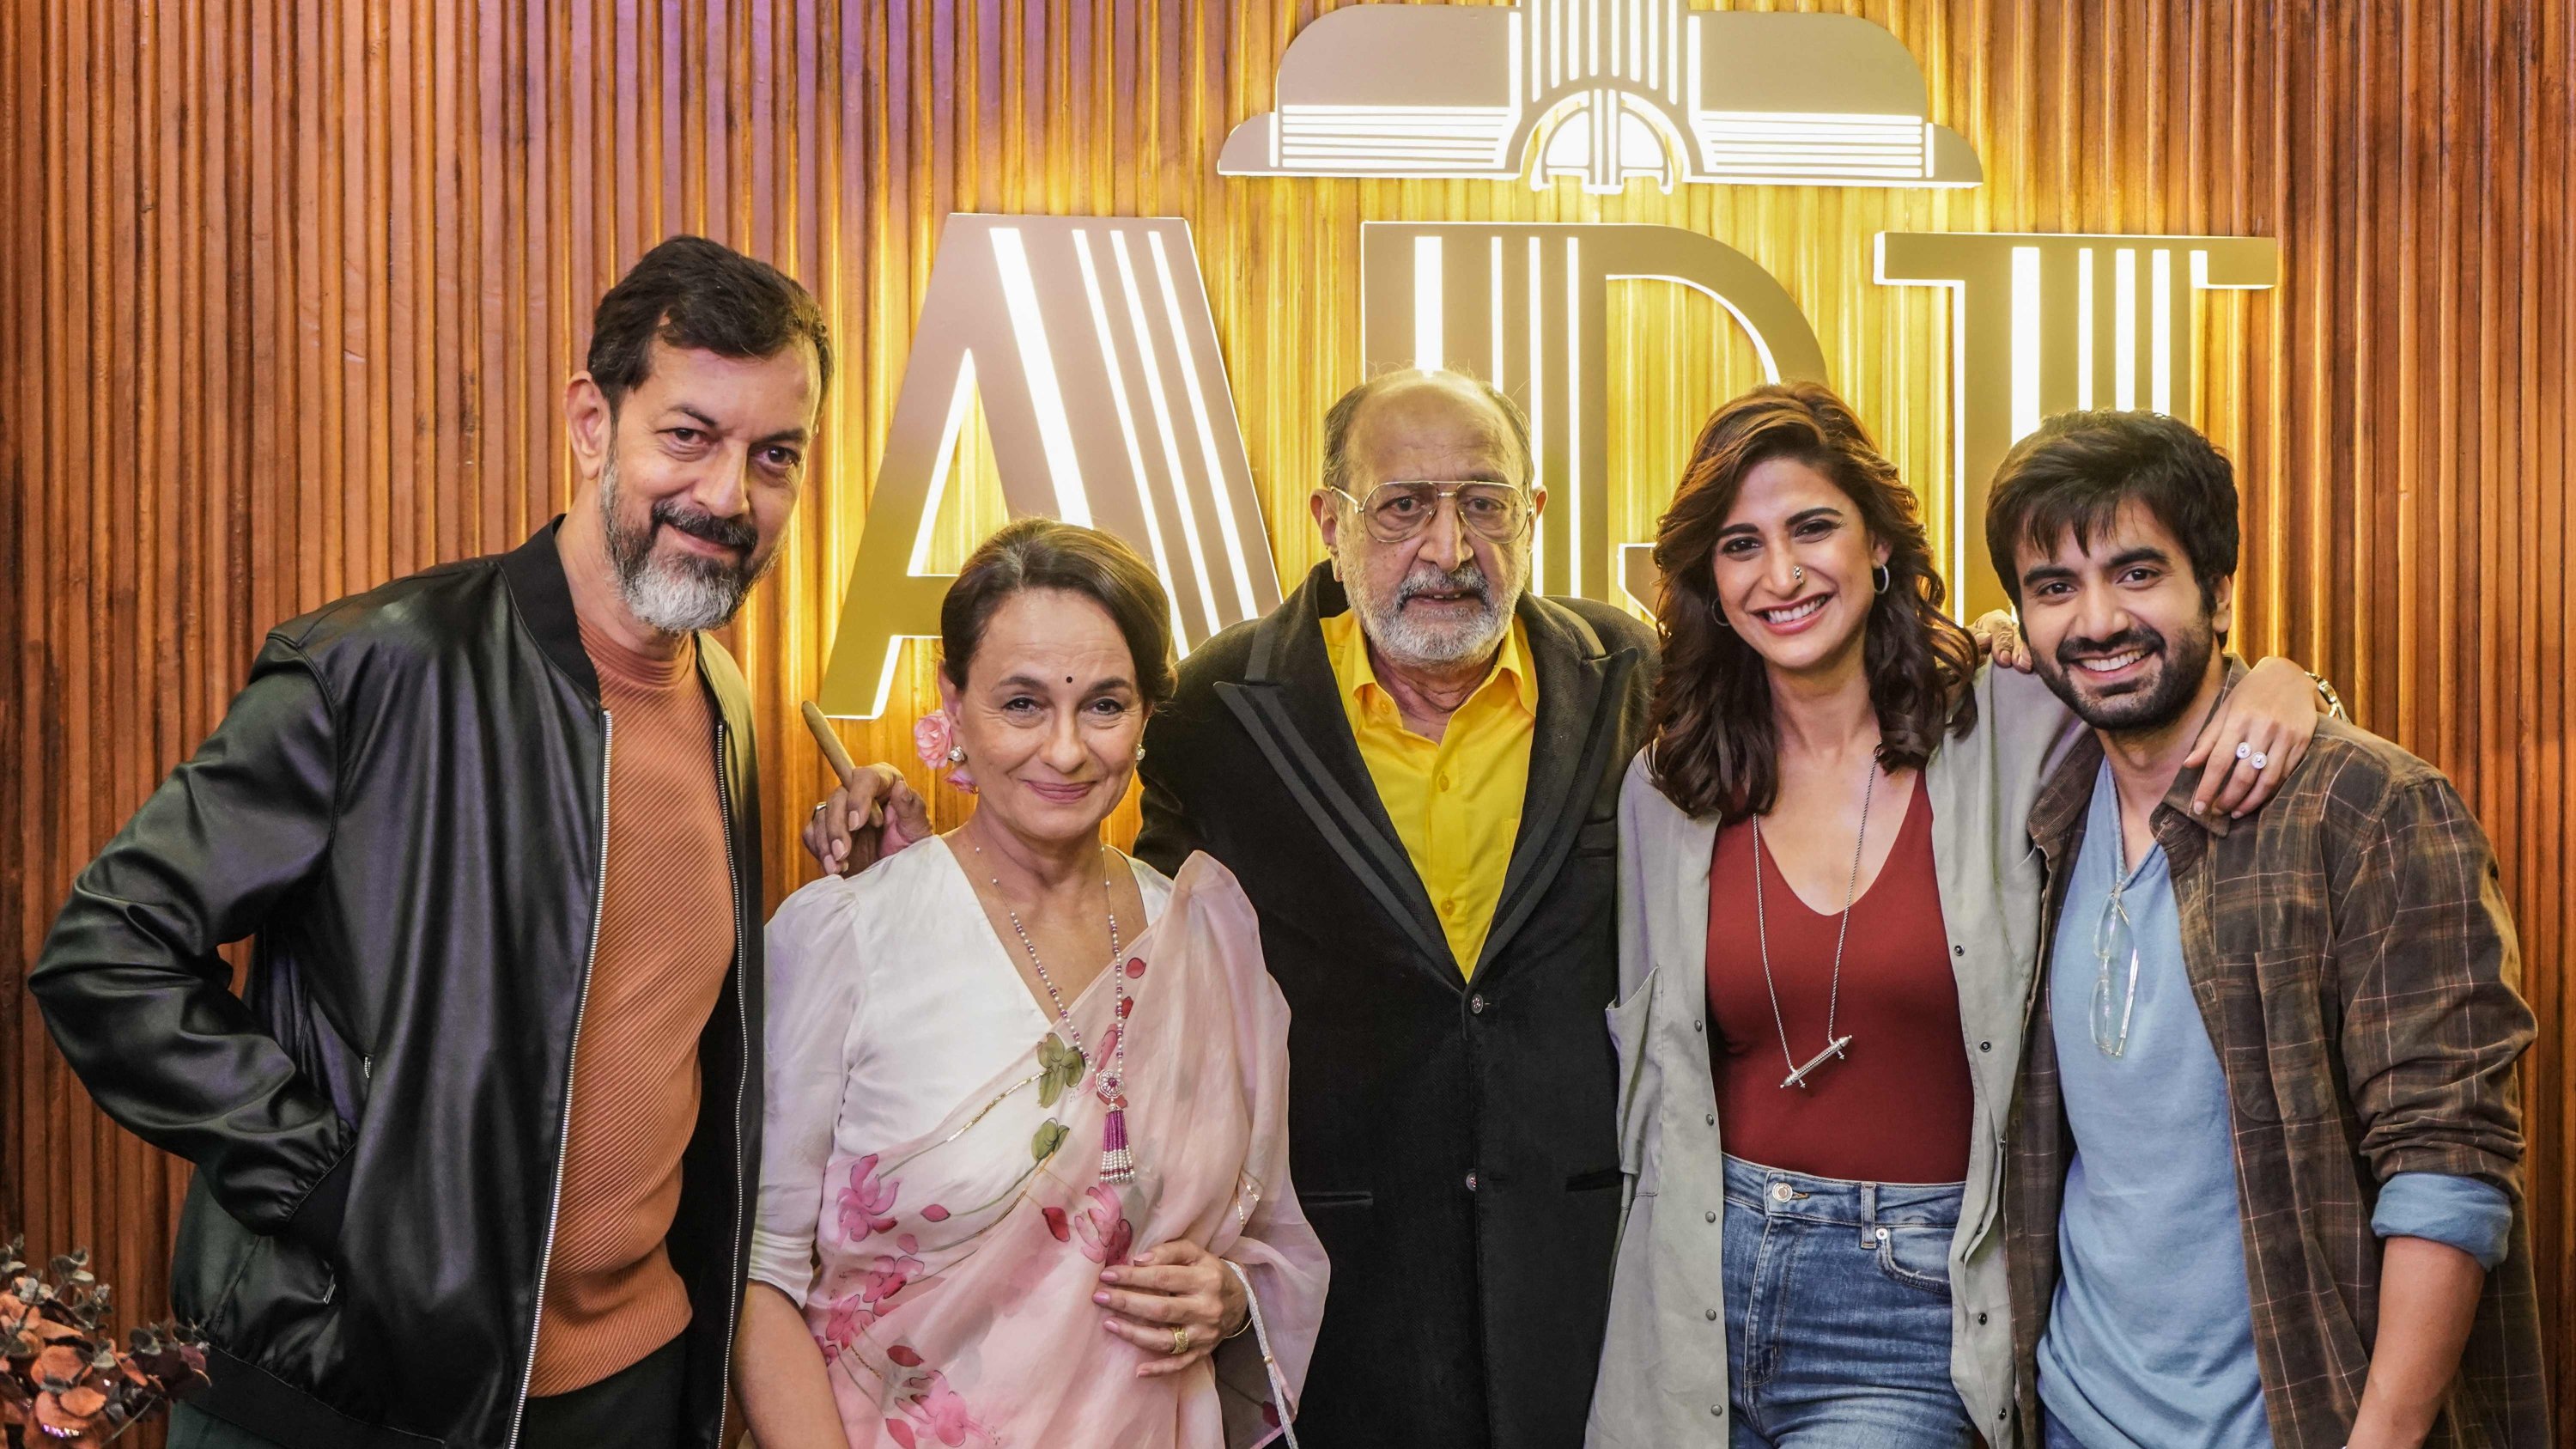 This undated handout photograph released by Netflix shows Bollywood actors and cast members (L-R) Rajat Kapoor, Soni Razdan, Tinnu Anand, Aahana Kumra and Ayush Mehra posing for pictures for the promotion of the Indian drama web series 